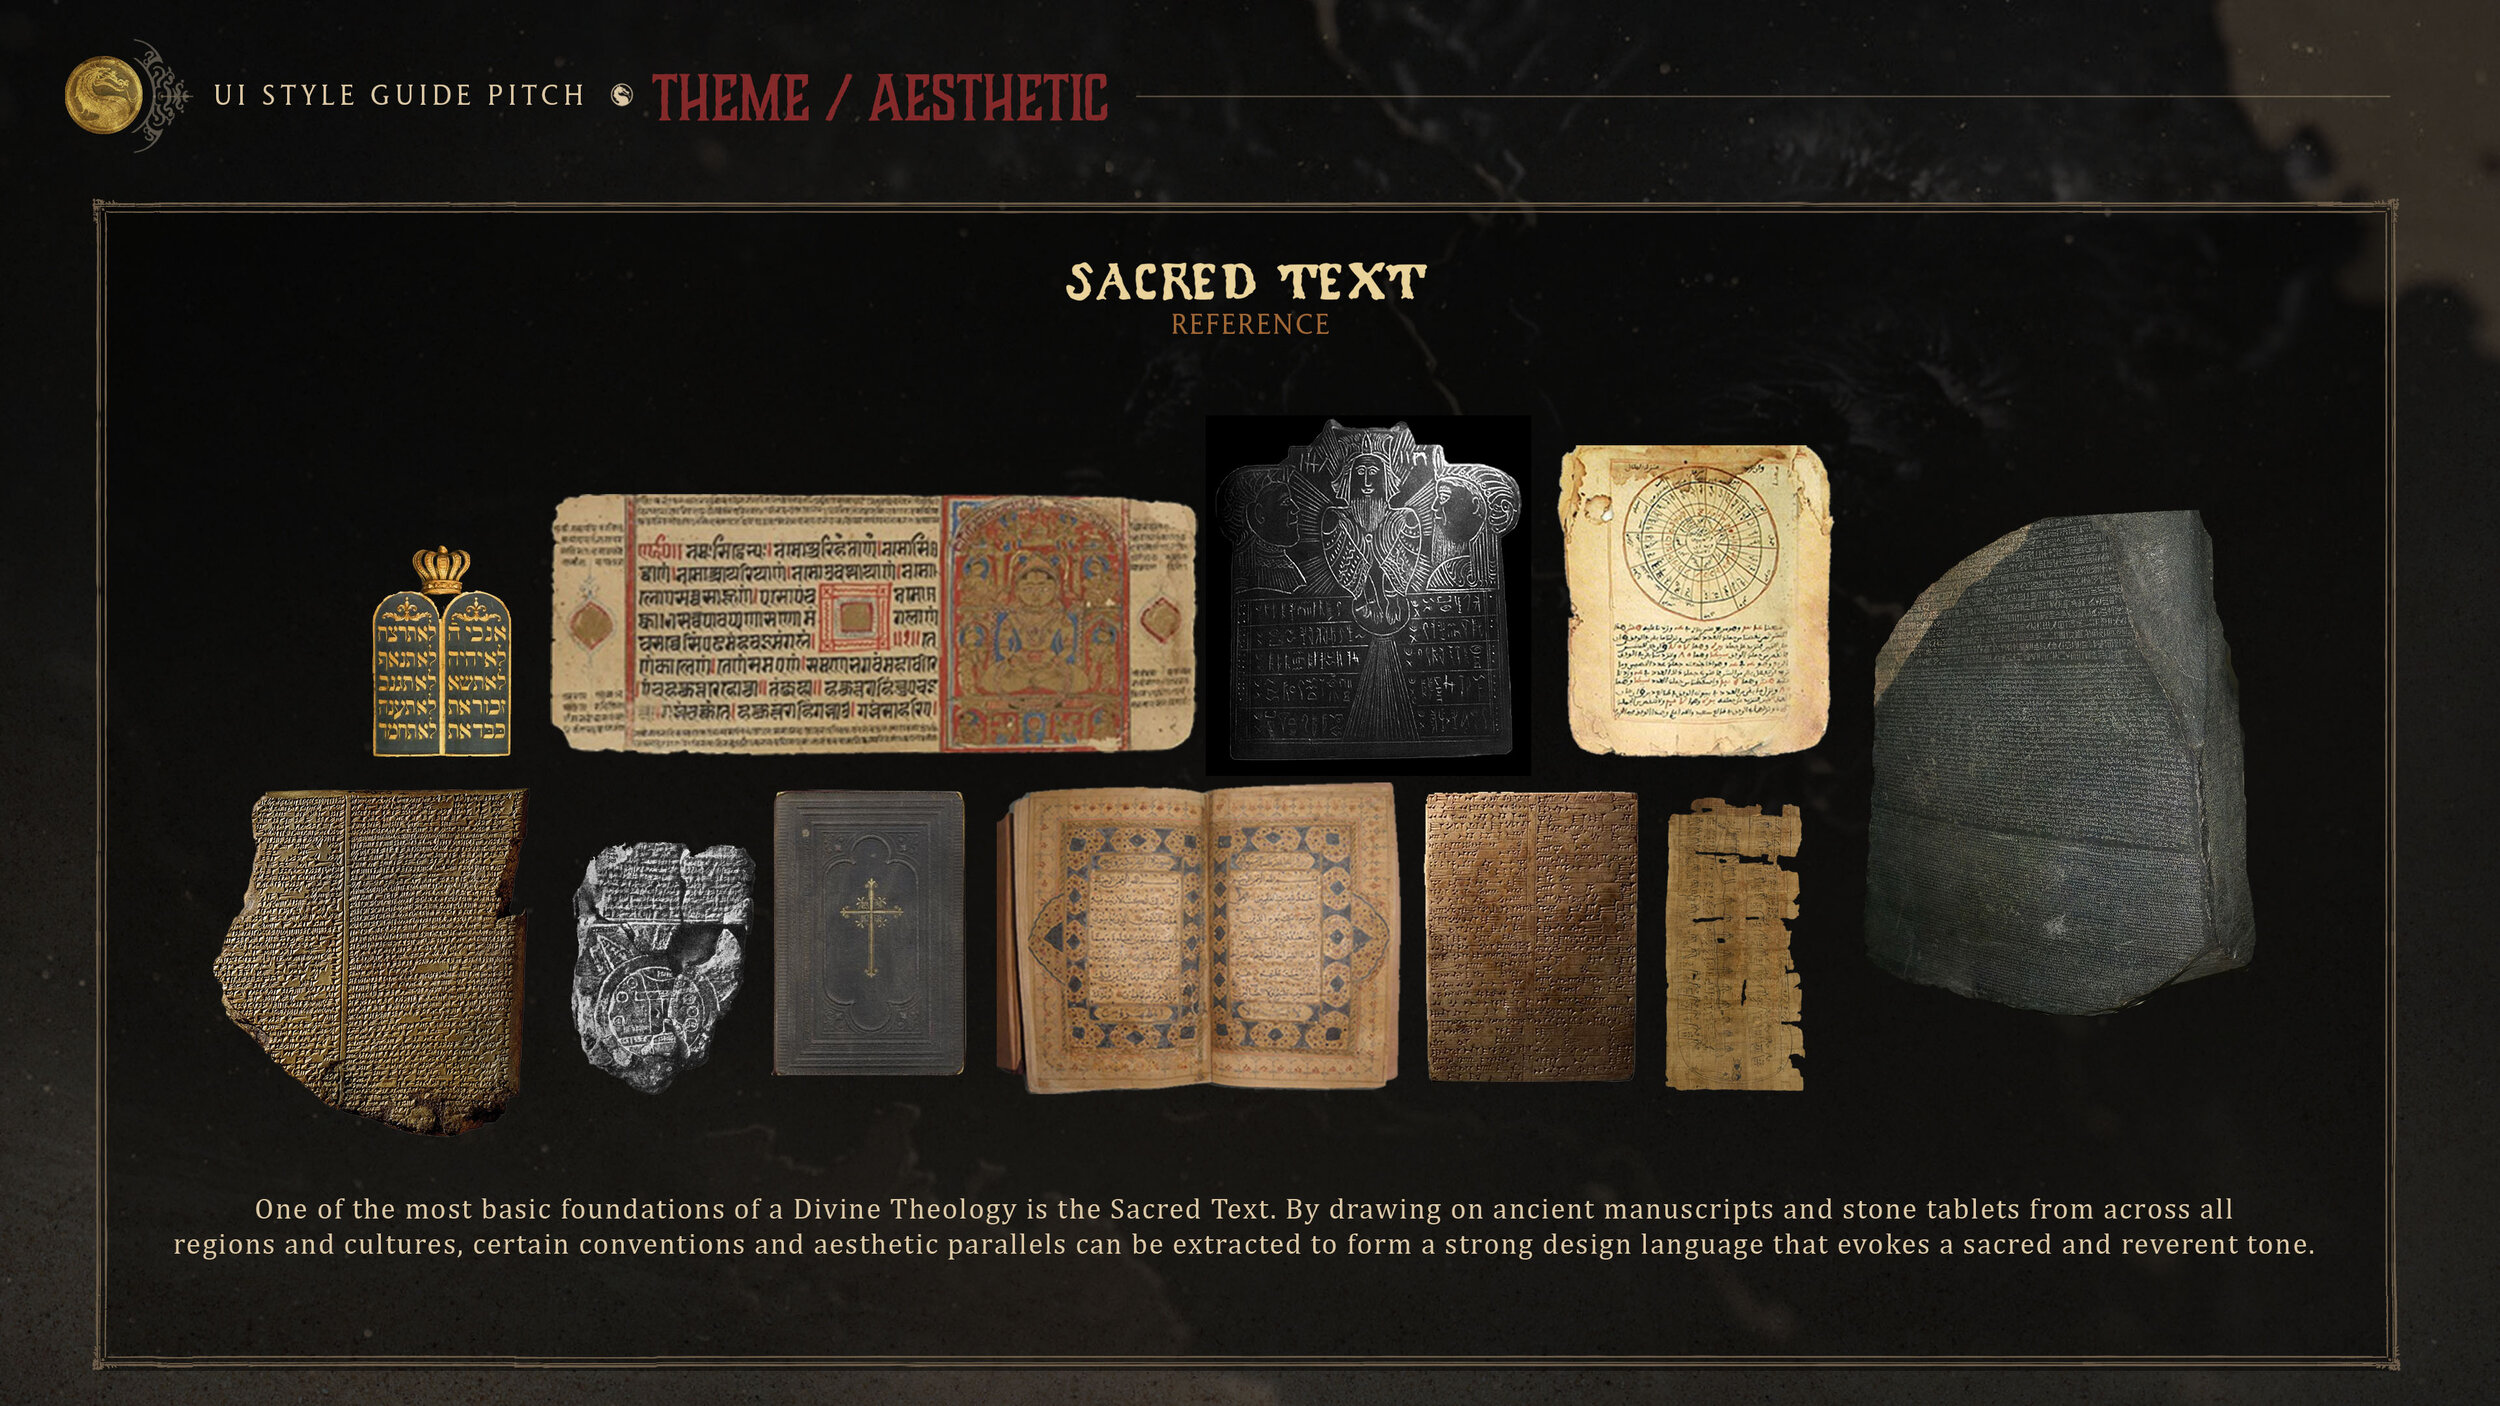 MK11StylePitch_03_Sacred Text Reference.jpg